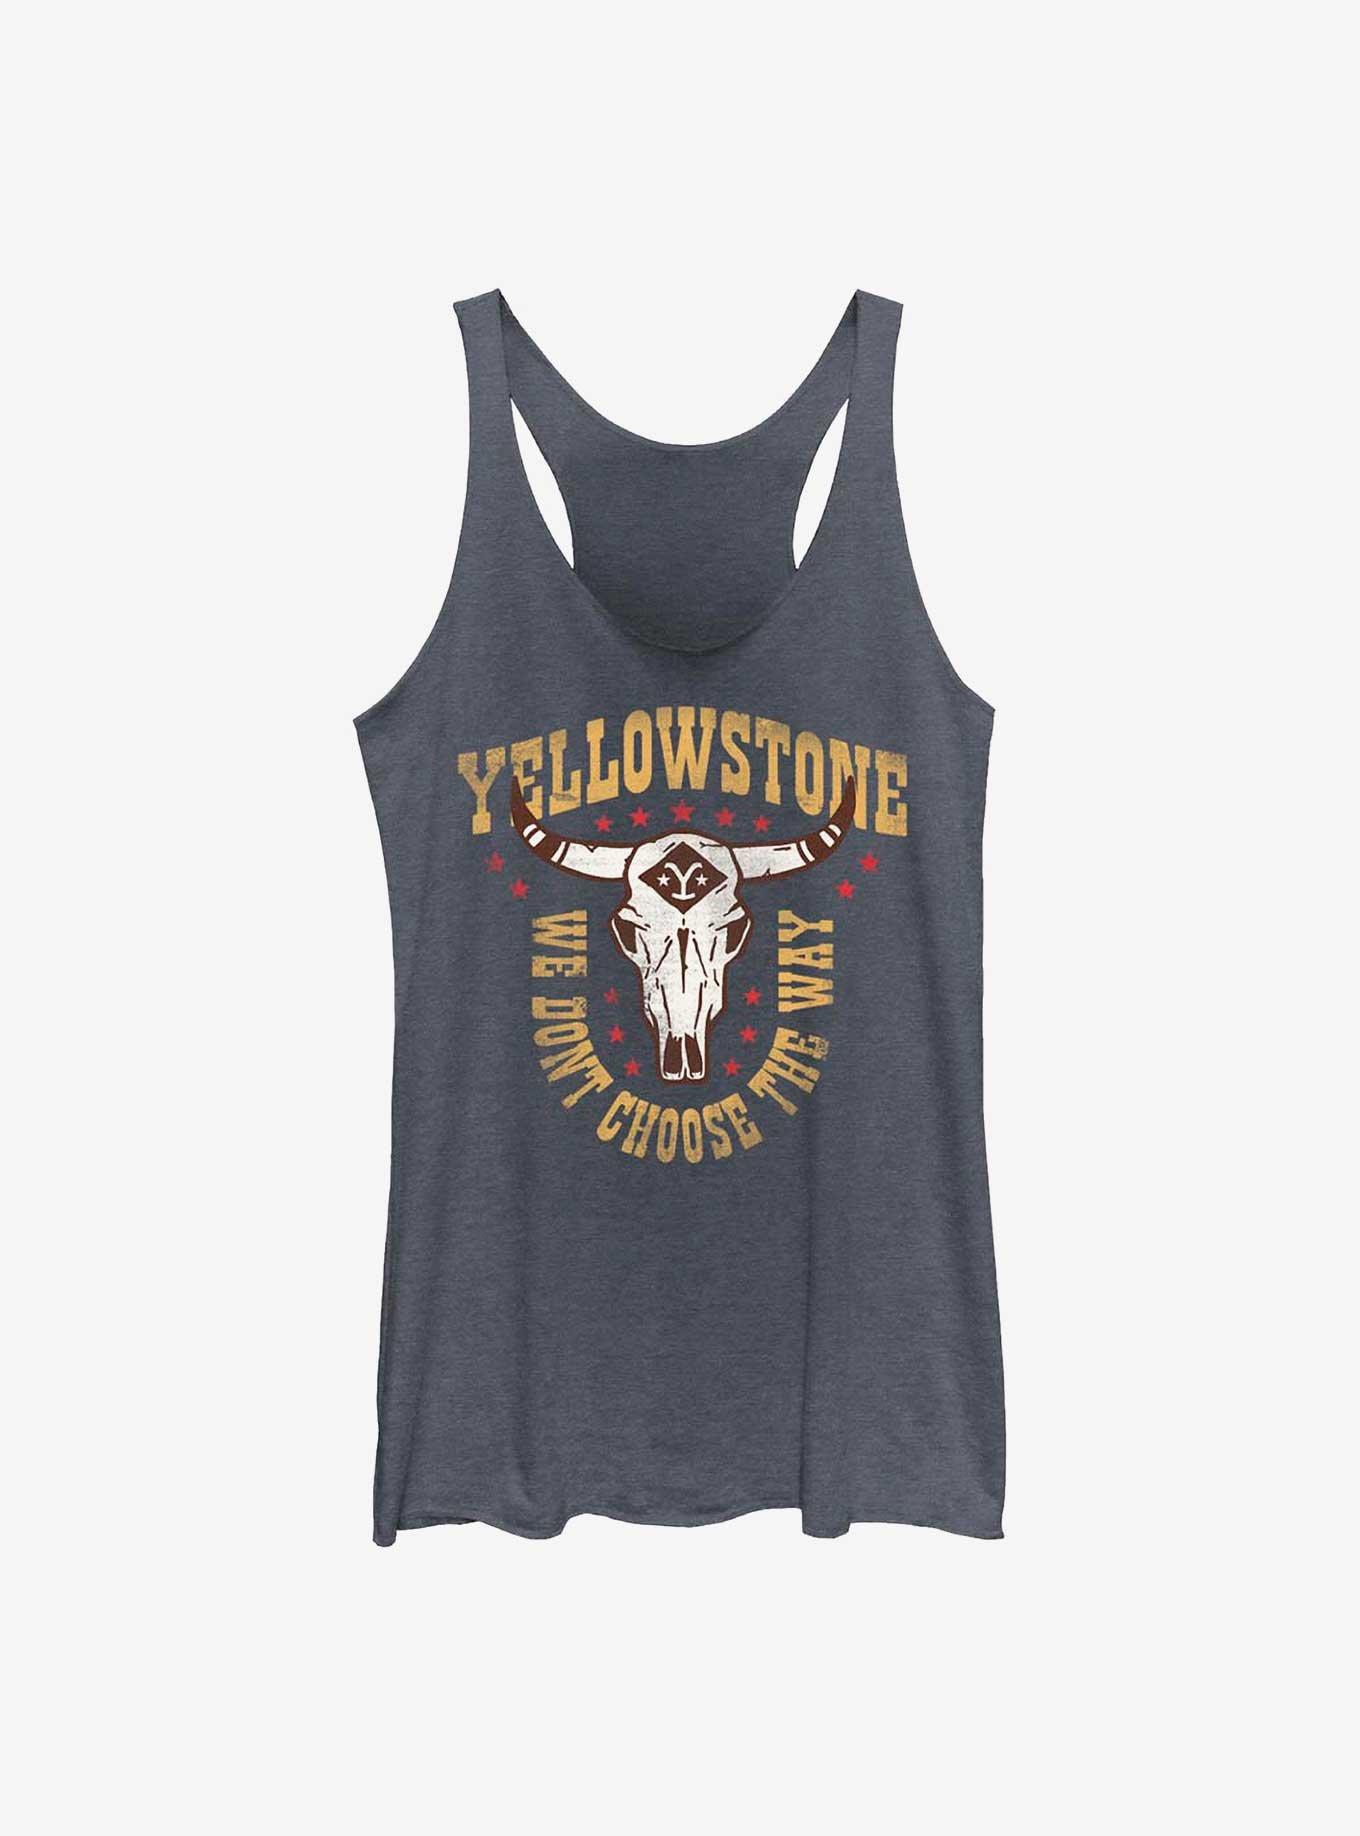 Yellowstone We Don't Choose The Way Womens Tank Top, NAVY HTR, hi-res